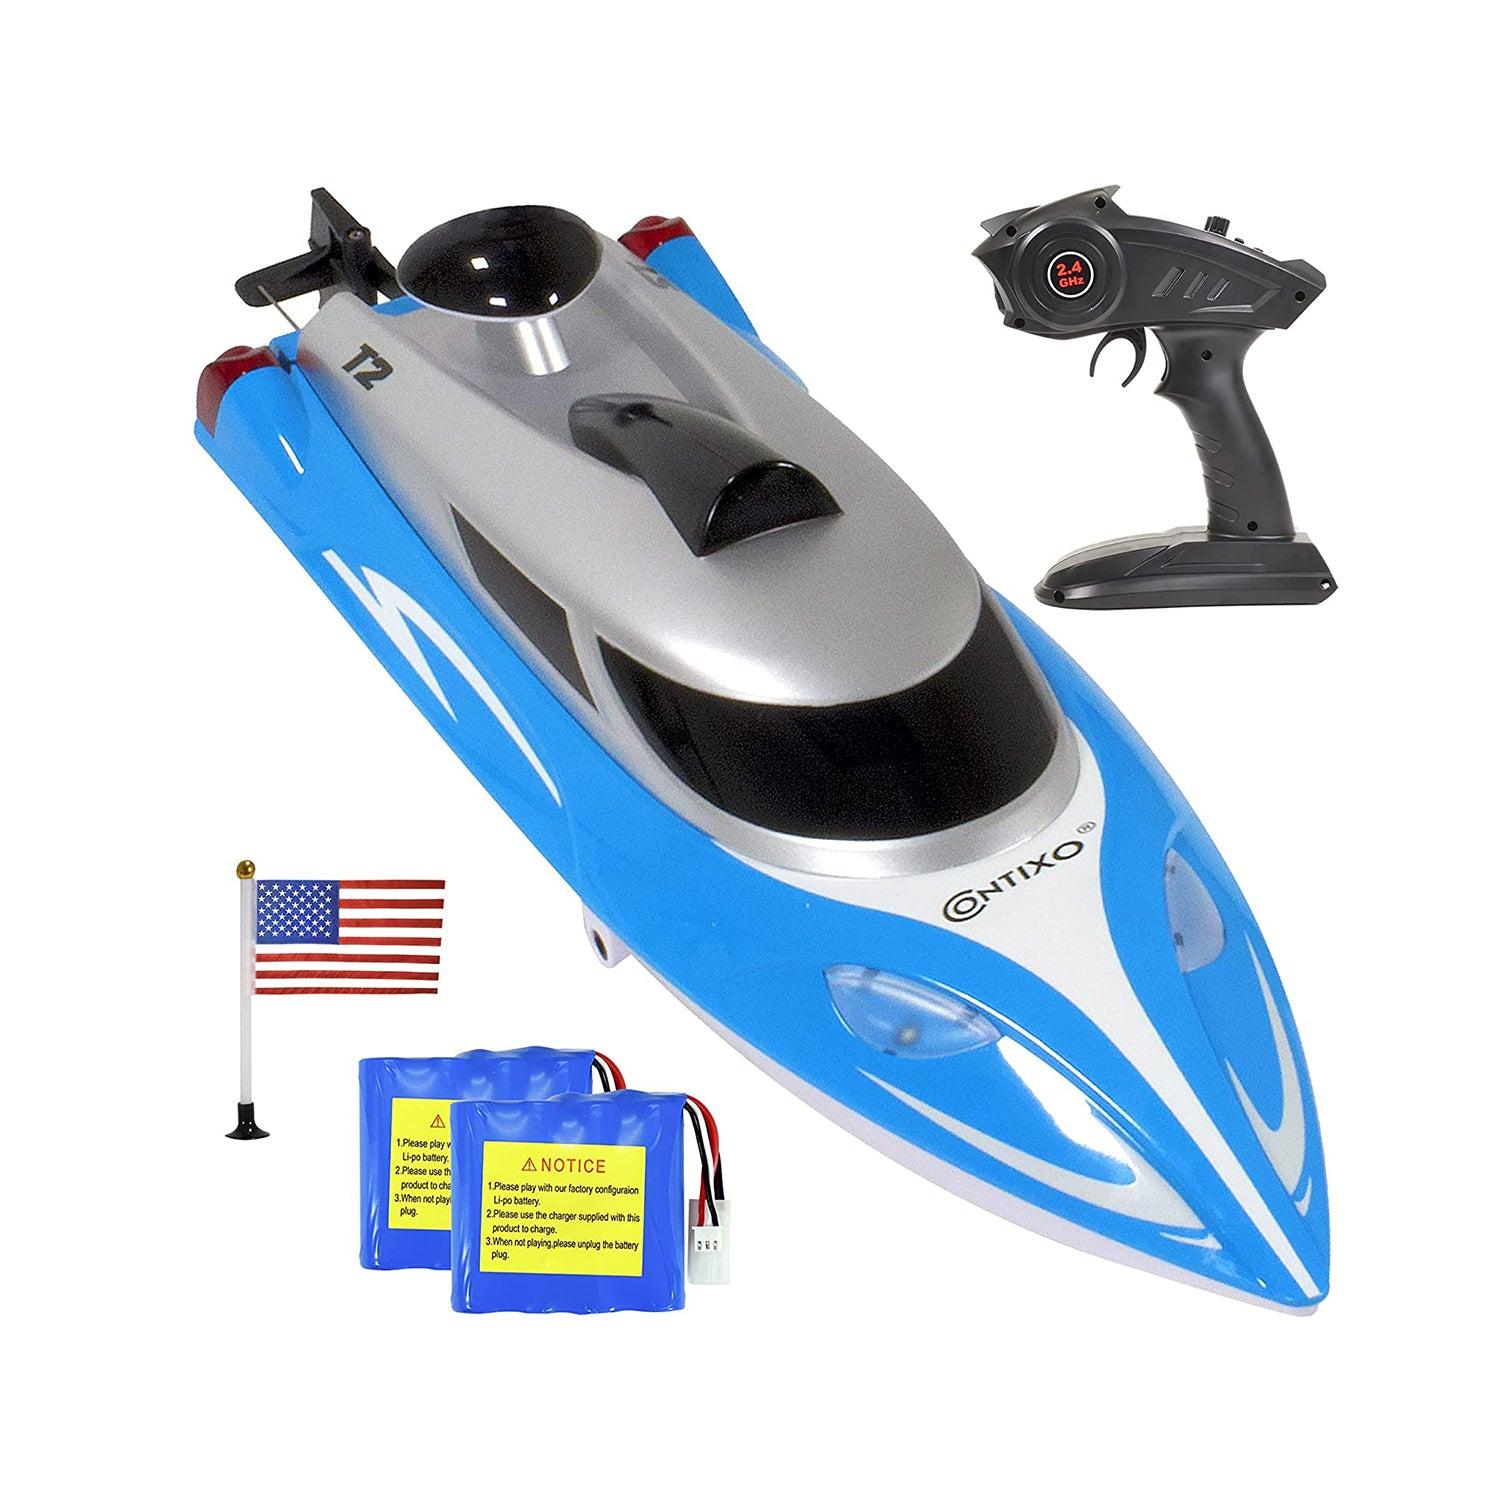 Saltwater Rc Boat: Impressive Capabilities: Saltwater RC Boats' Top Speeds and Runtimes